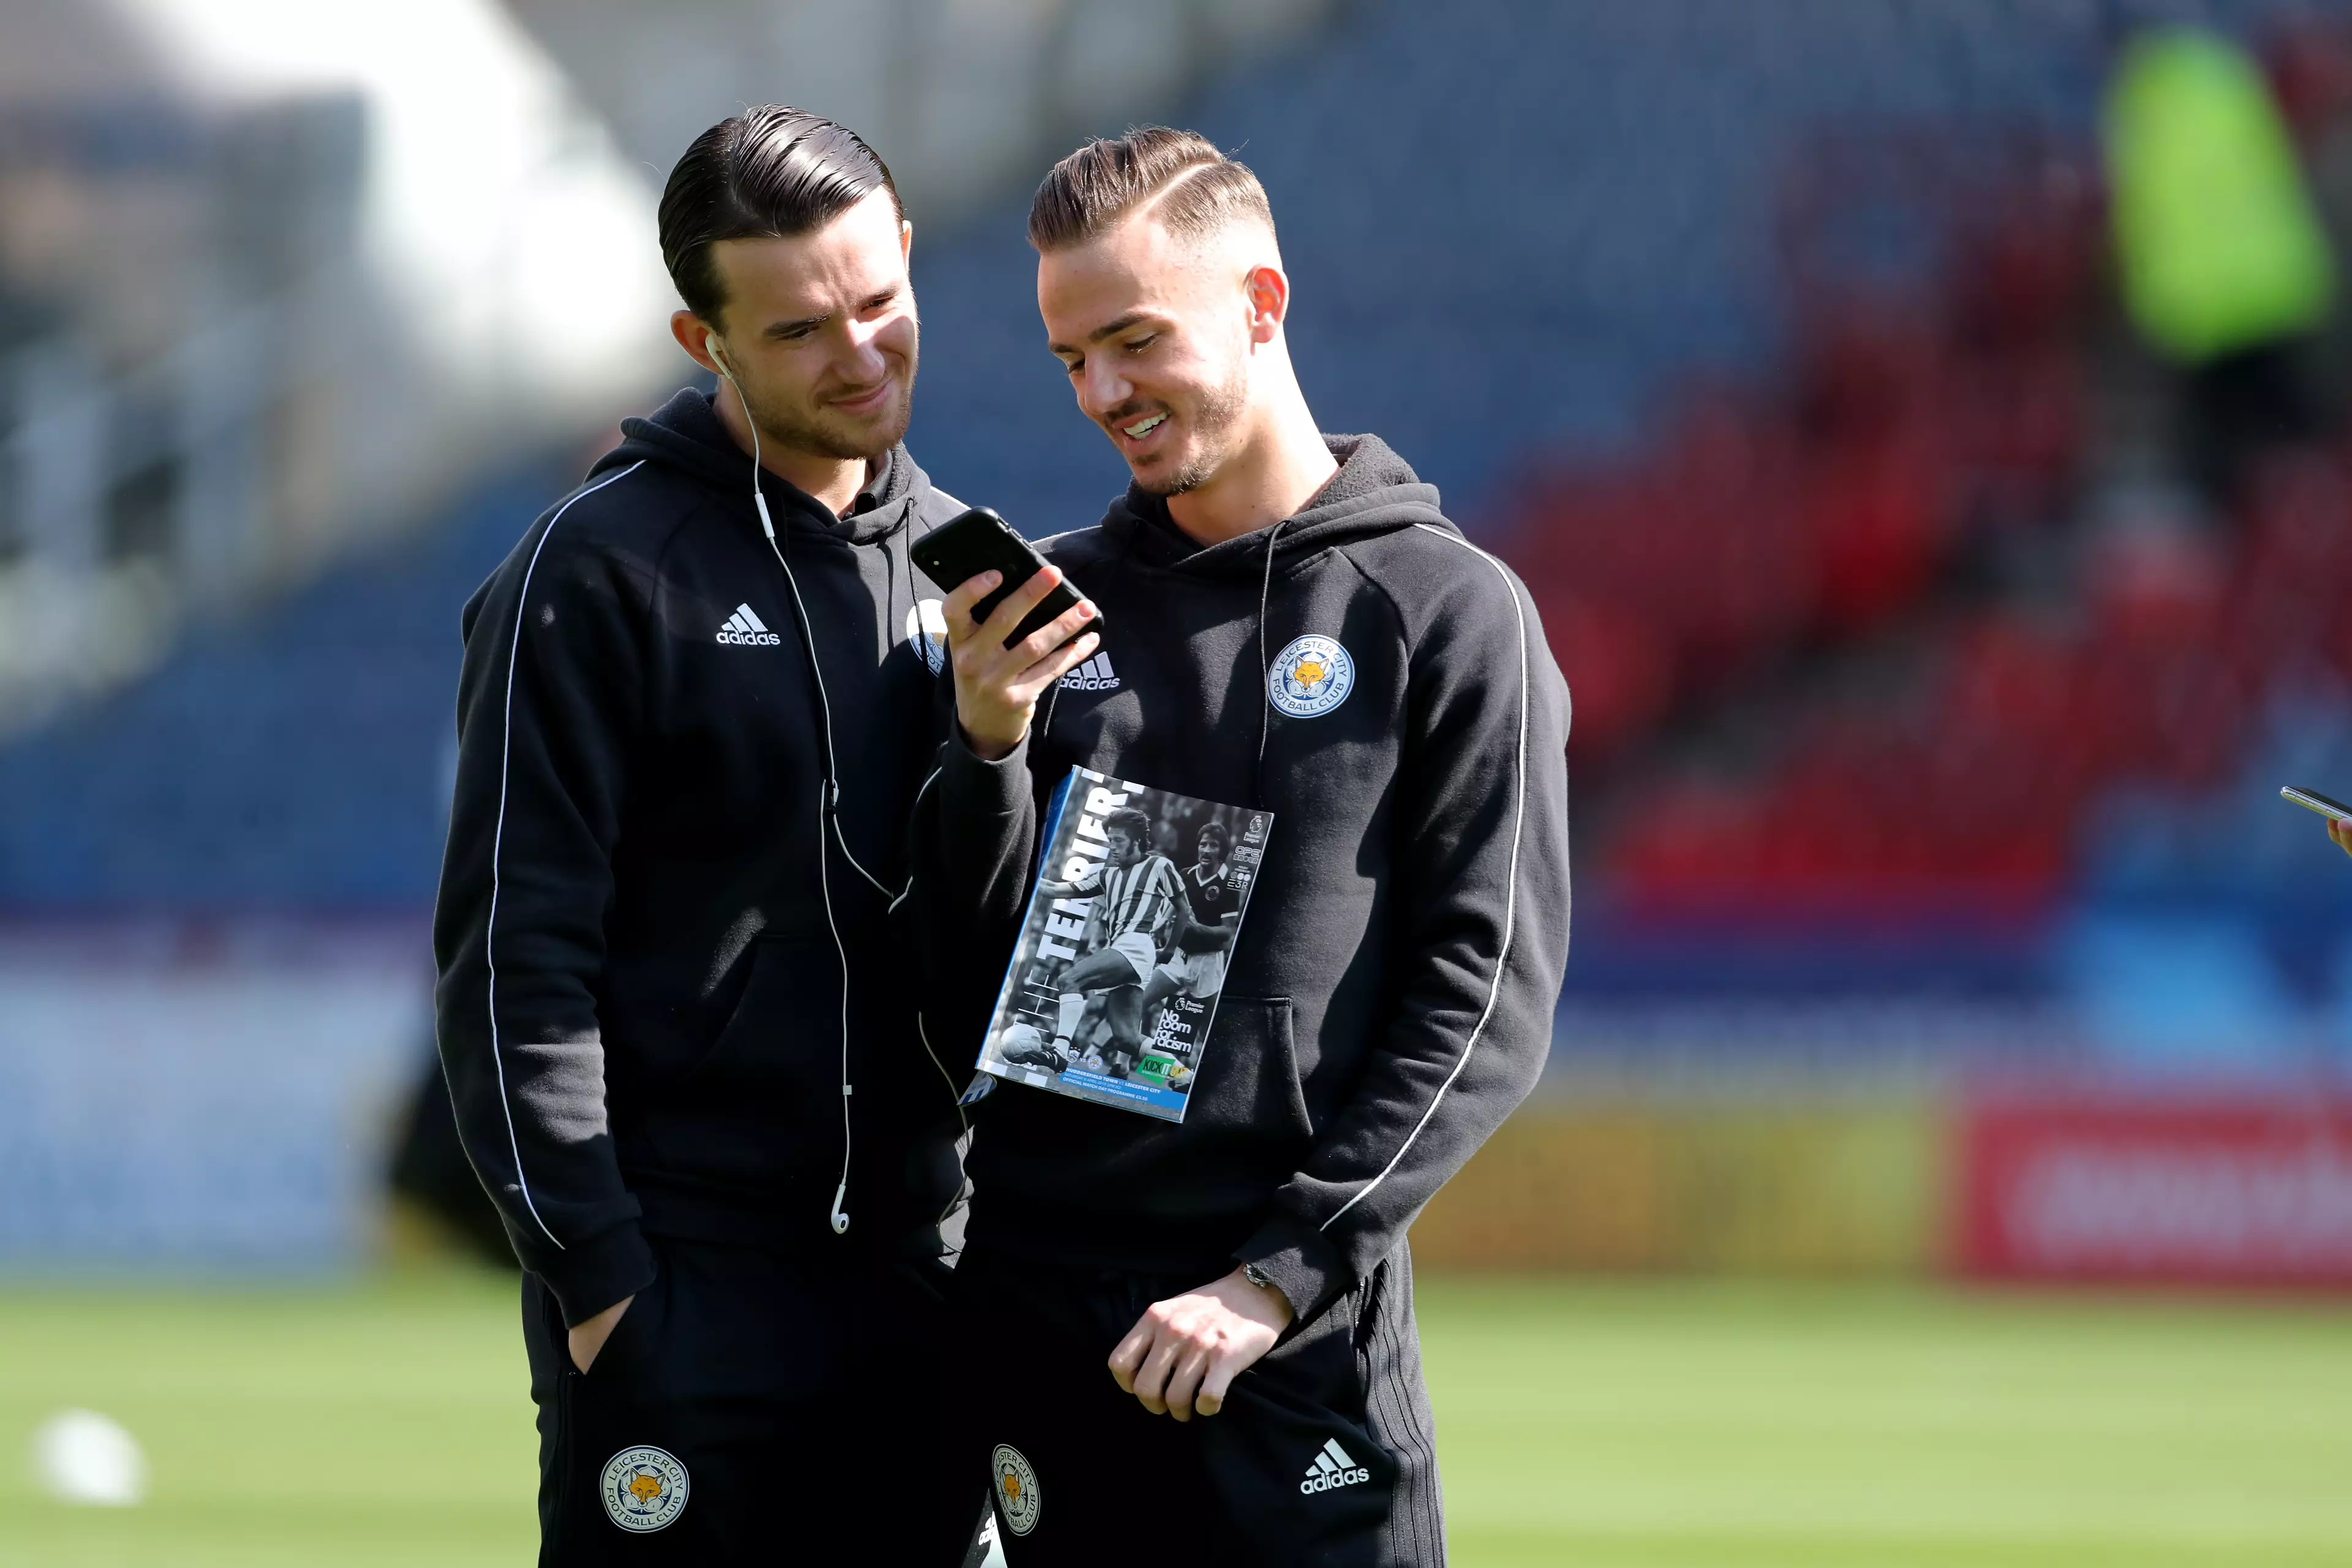 Maddison and Chilwell checking to find Manchester United on the Premier League table. 